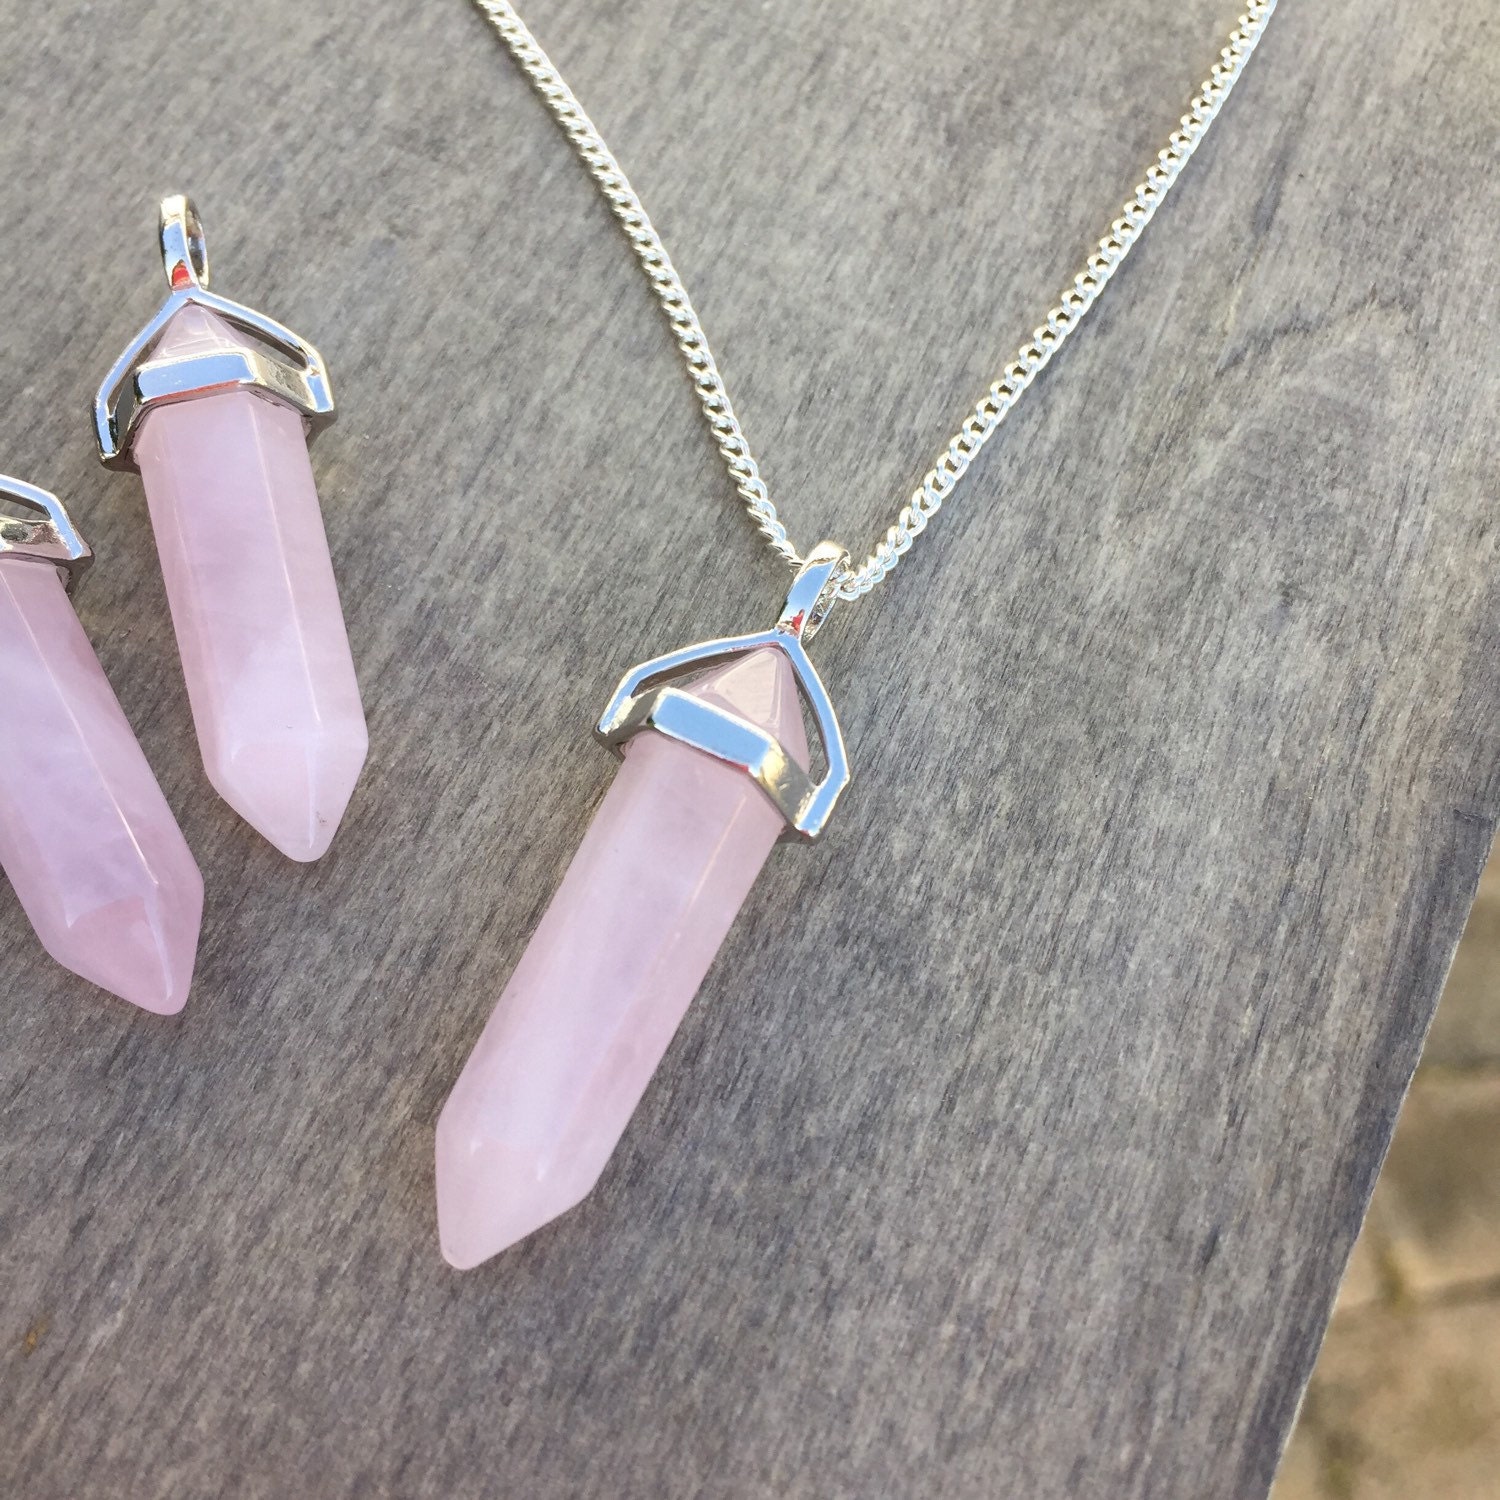 20 Of the Best Ideas for Rose Quartz Crystal Necklace - Home, Family ...